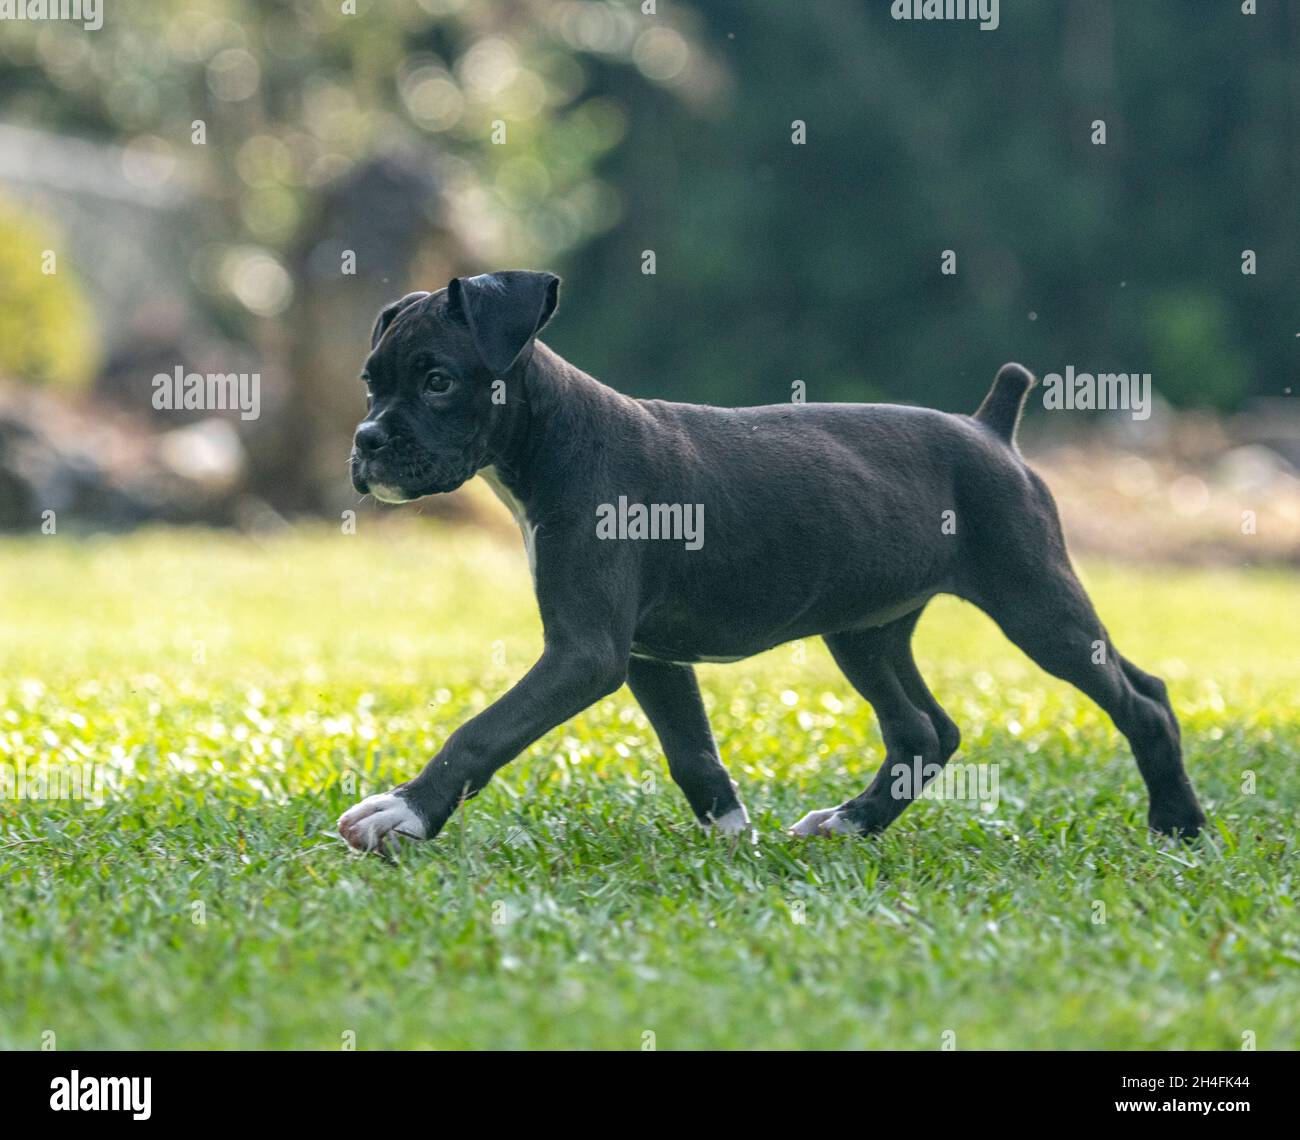 Alert 9 week old black Boxer dog puppy plays on grass lawn Stock Photo -  Alamy